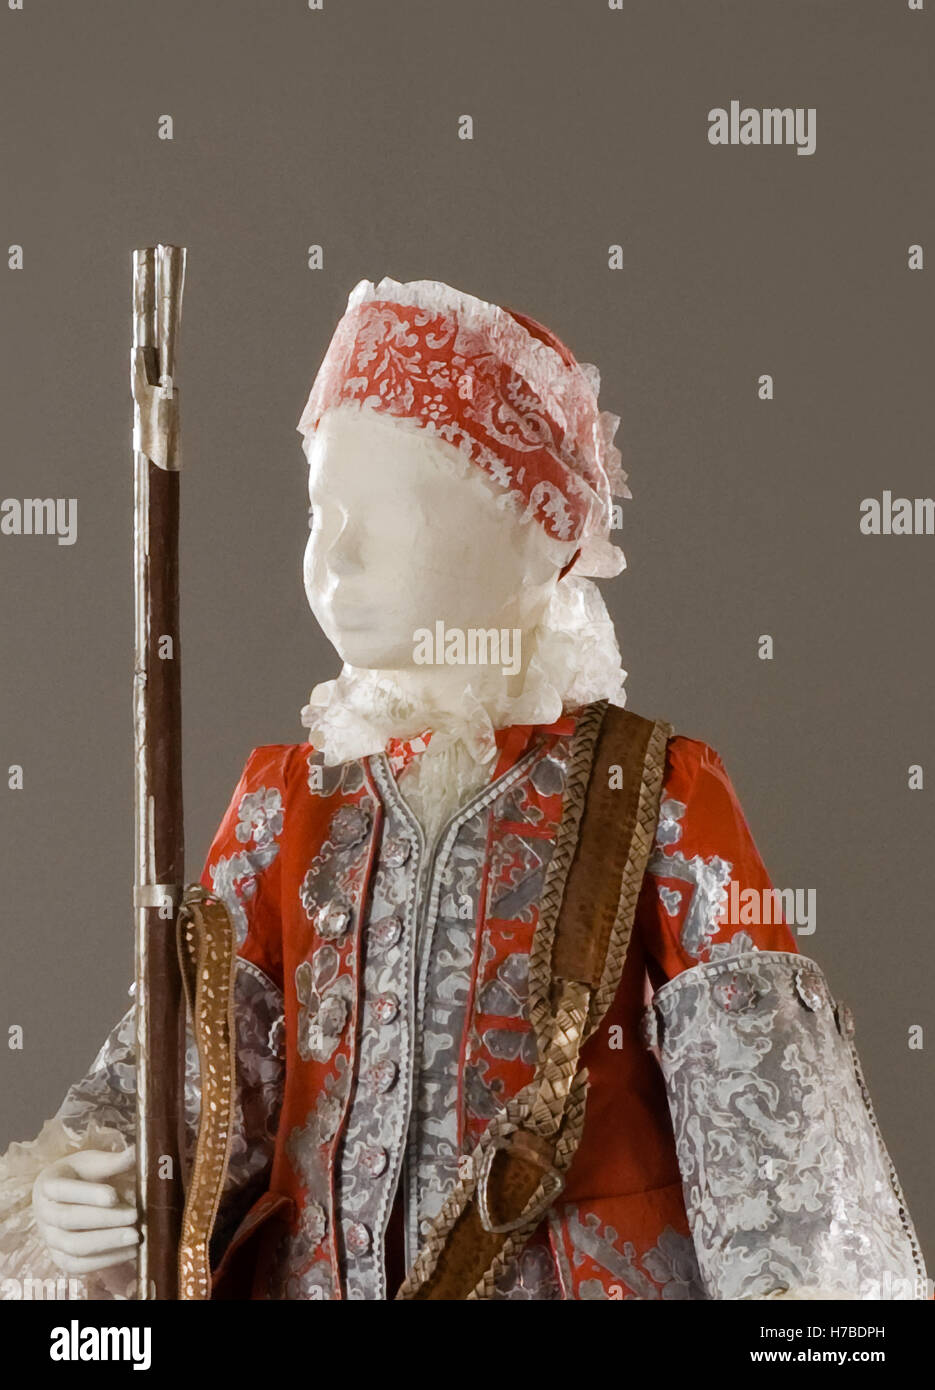 Child in hunting costume,  historical replica paper garments,  by Isabelle de Borchgrave Stock Photo